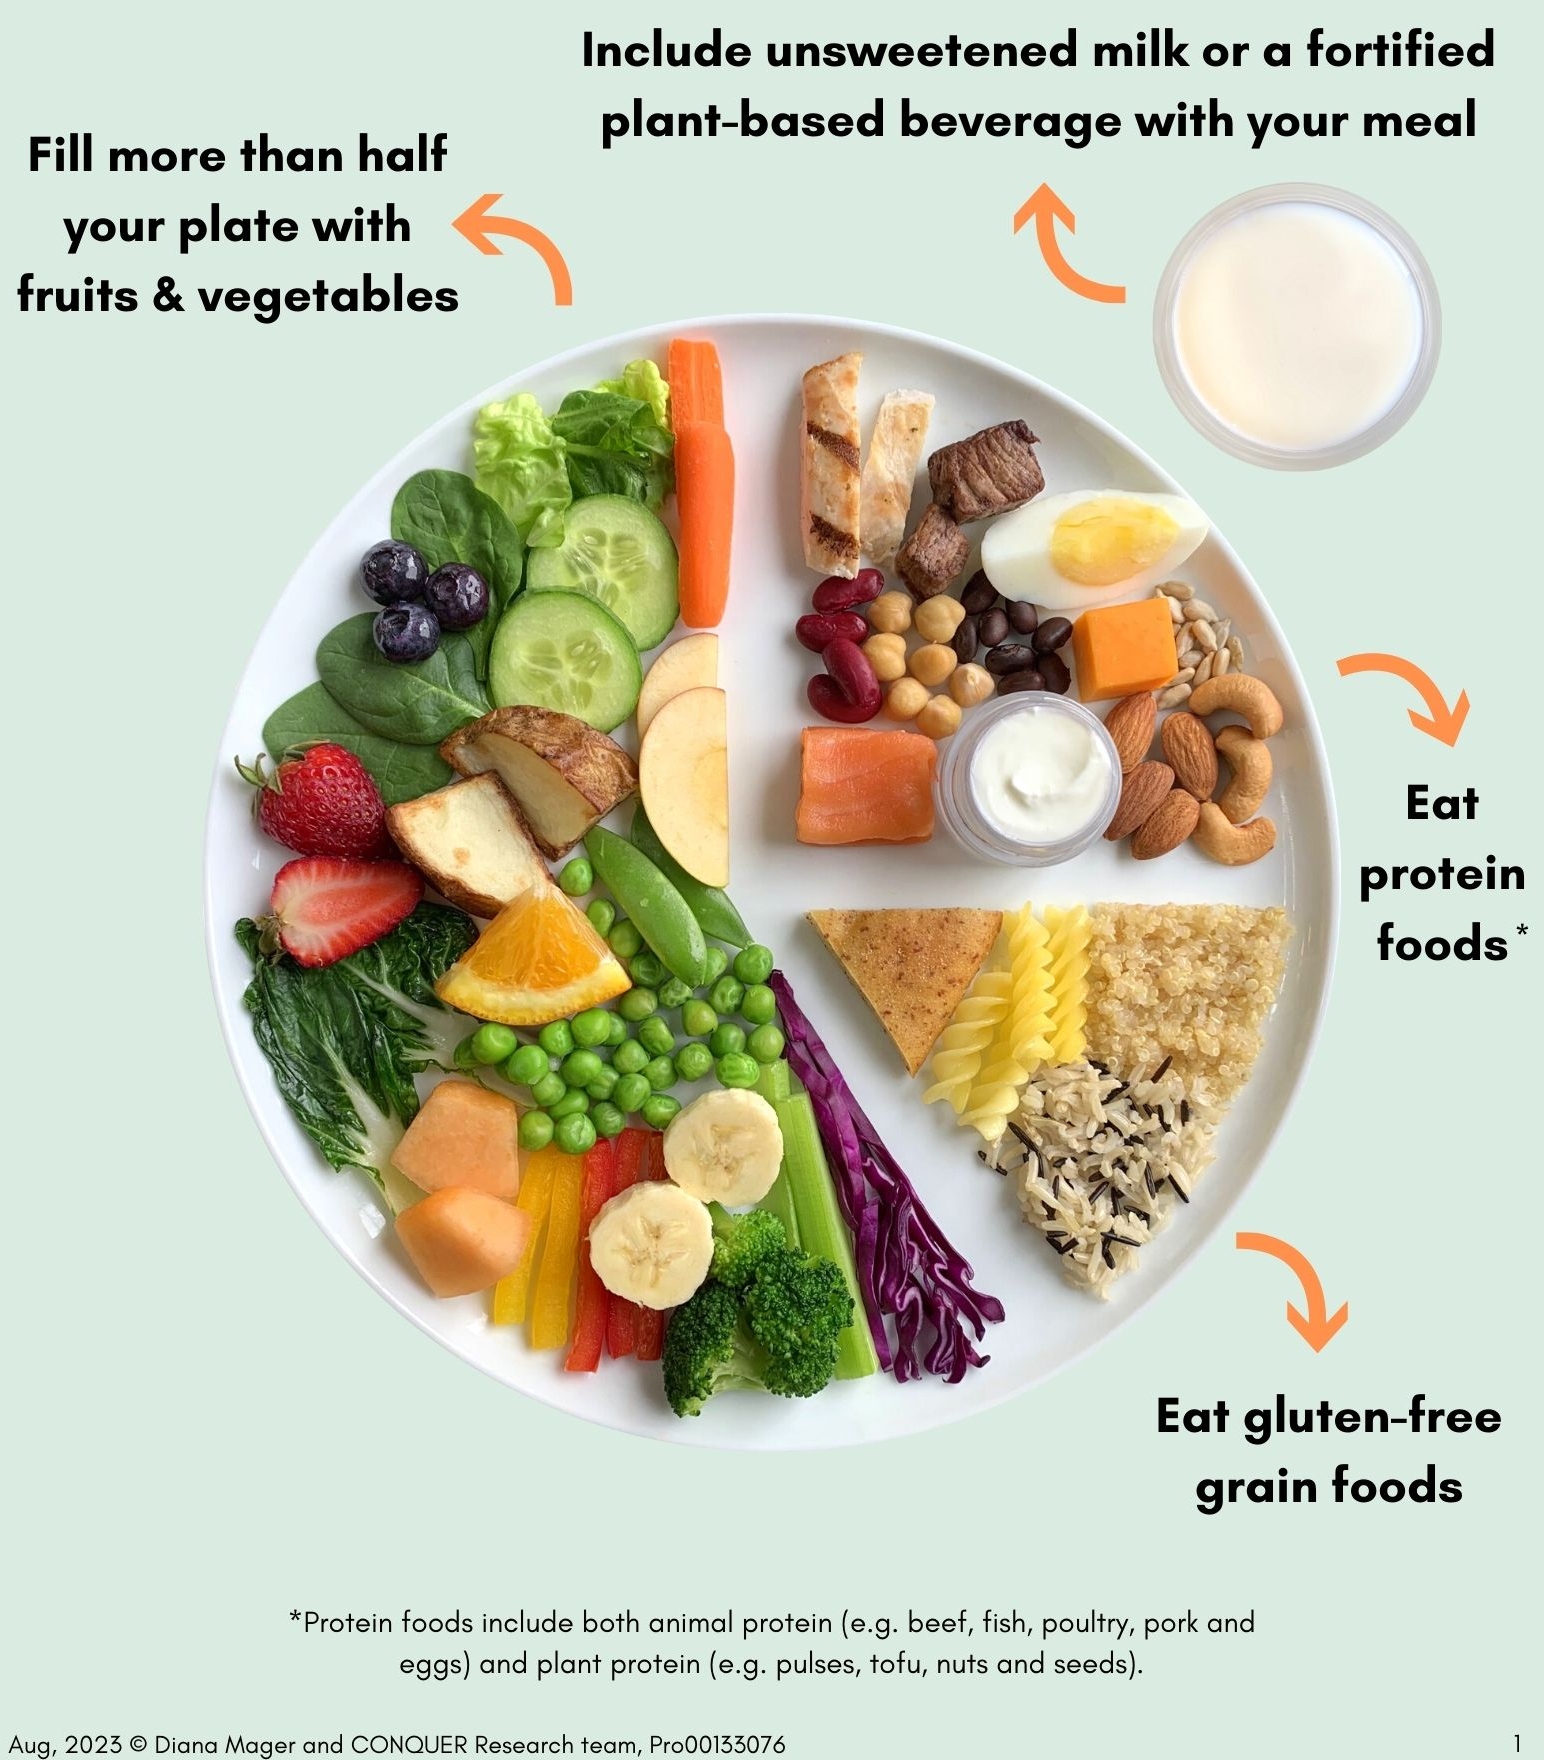 A plate showing recommended servings in a gluten-free food guide created by U of A researchers. The guide recommends filling just over half the plate with fruit and vegetables, and eating gluten-free grains such as pasta or rice, along with proteins such as seeds, nuts, fish, eggs and other animal proteins. The plan also includes a serving of unsweetened milk or a fortified plant-based beverage. (Image: Supplied)